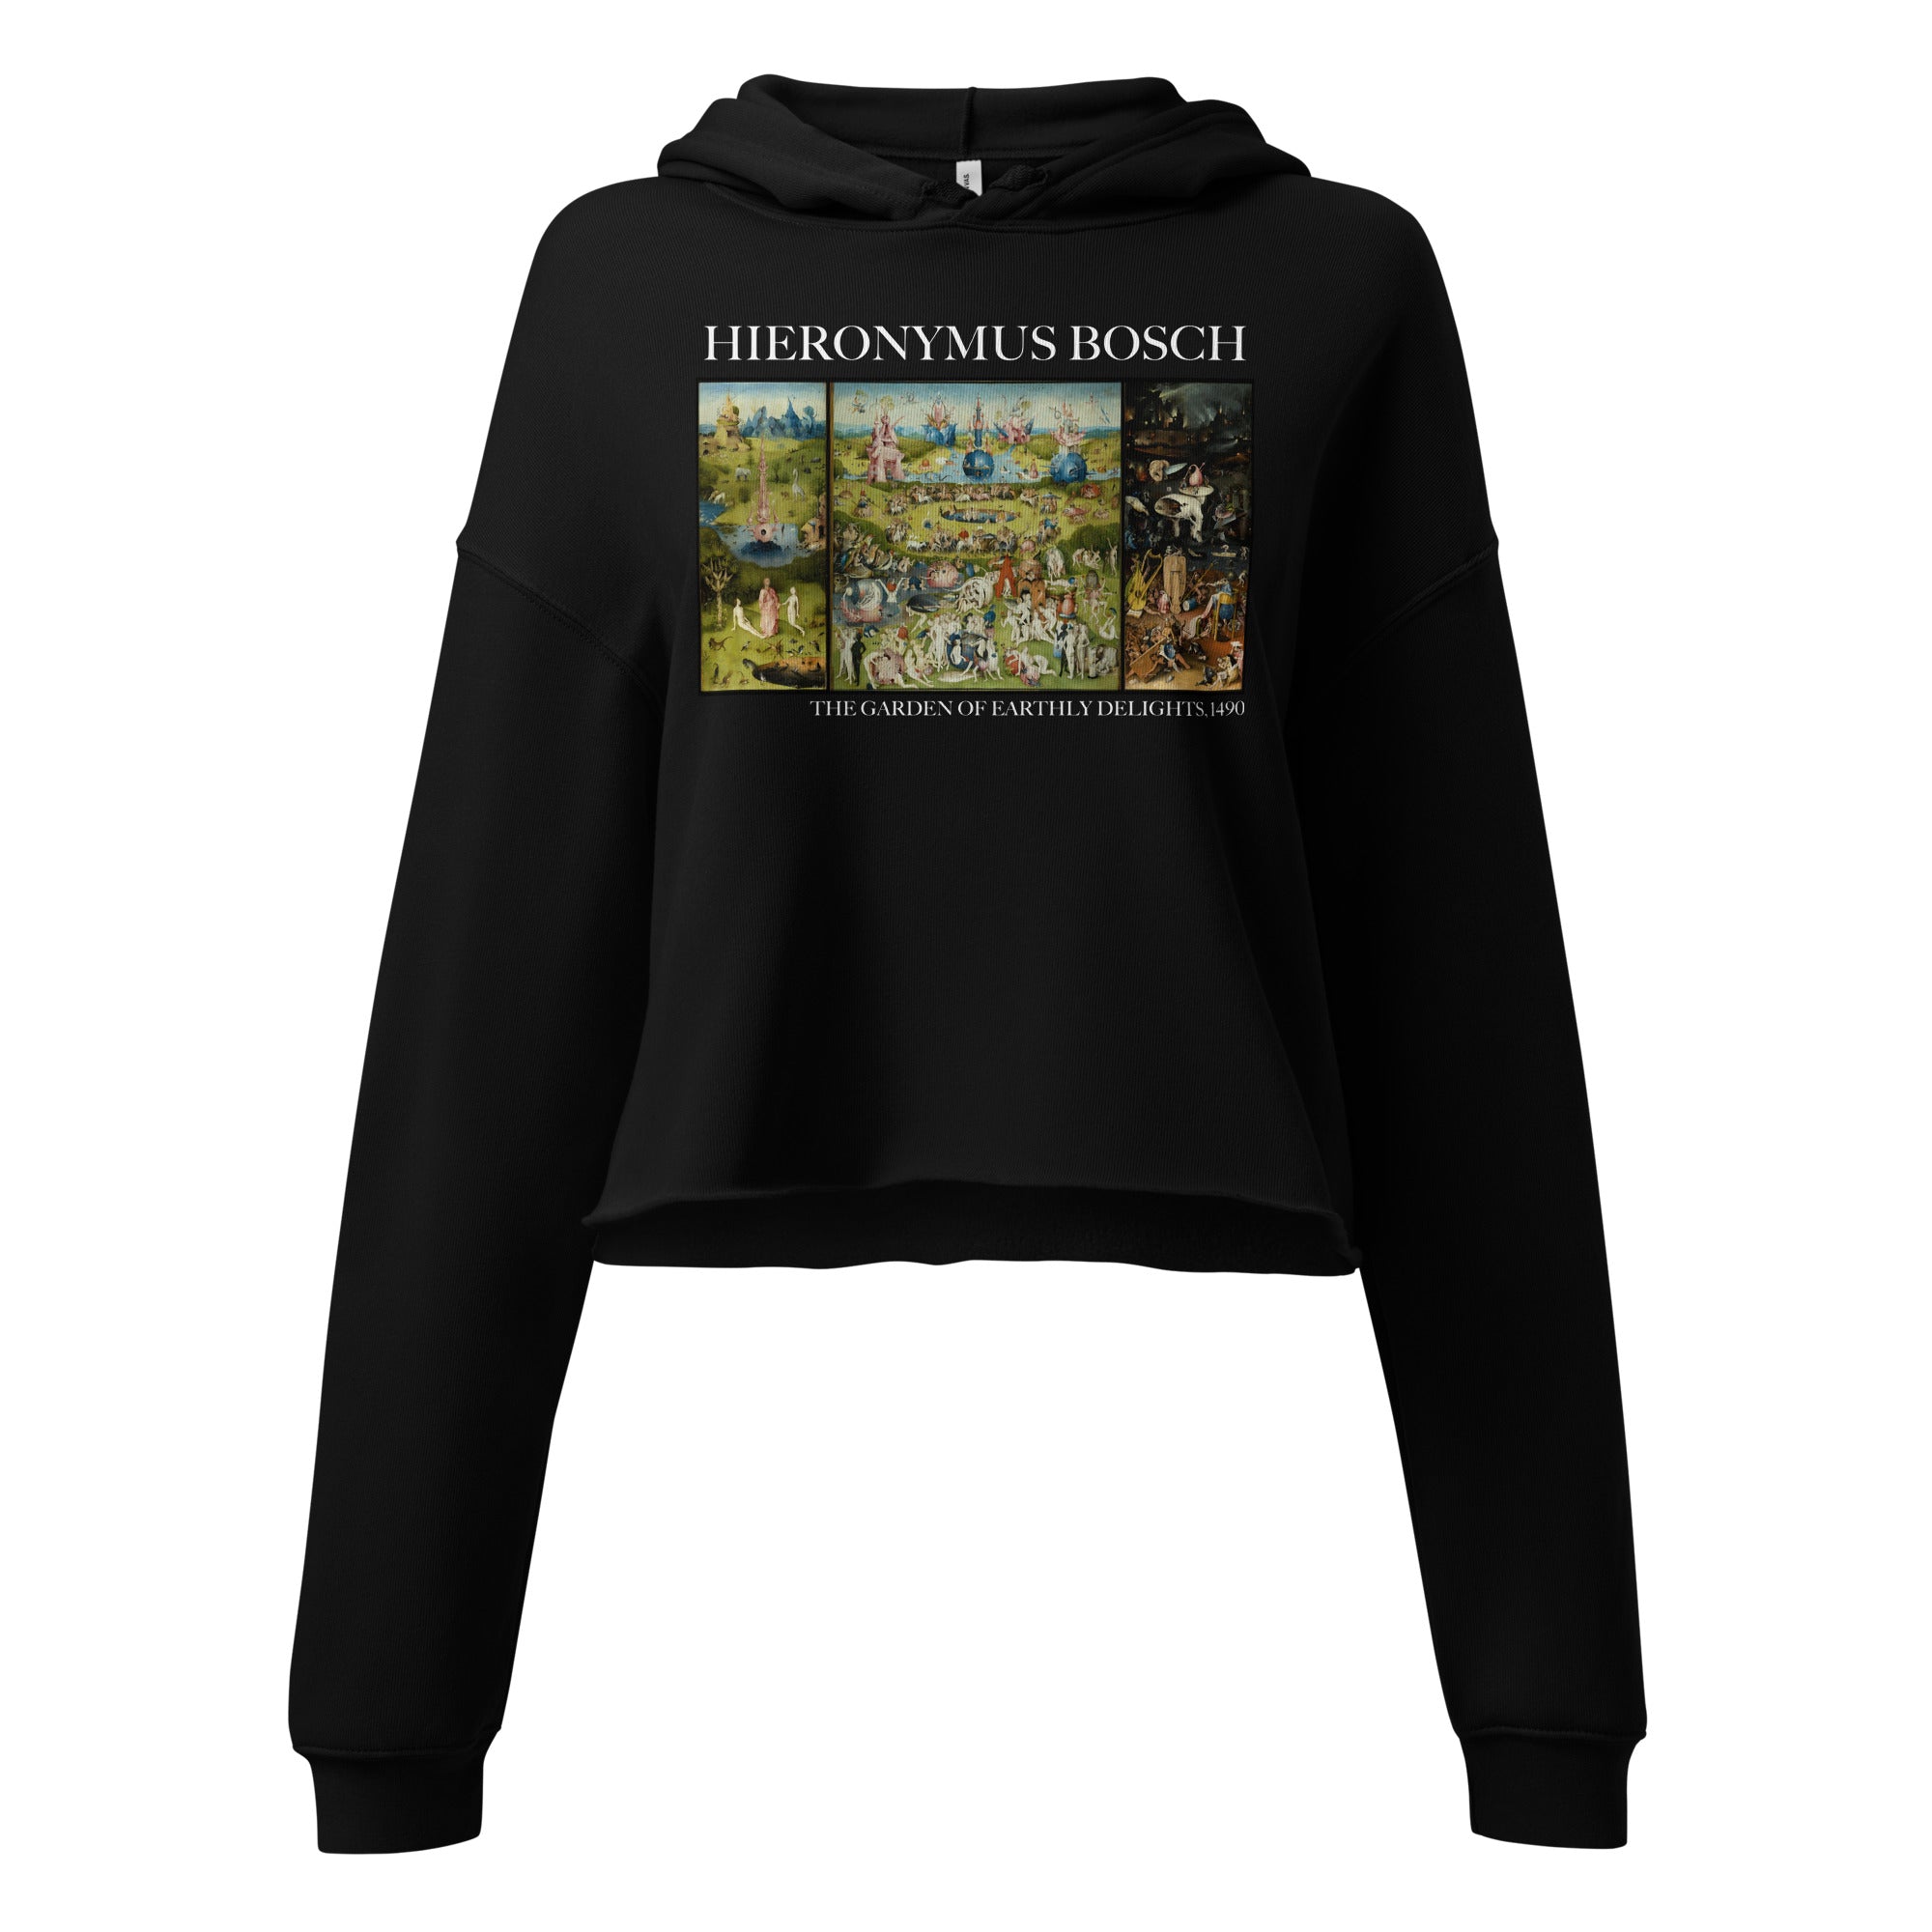 Hieronymus Bosch 'The Garden of Earthly Delights' Famous Painting Cropped Hoodie | Premium Art Cropped Hoodie